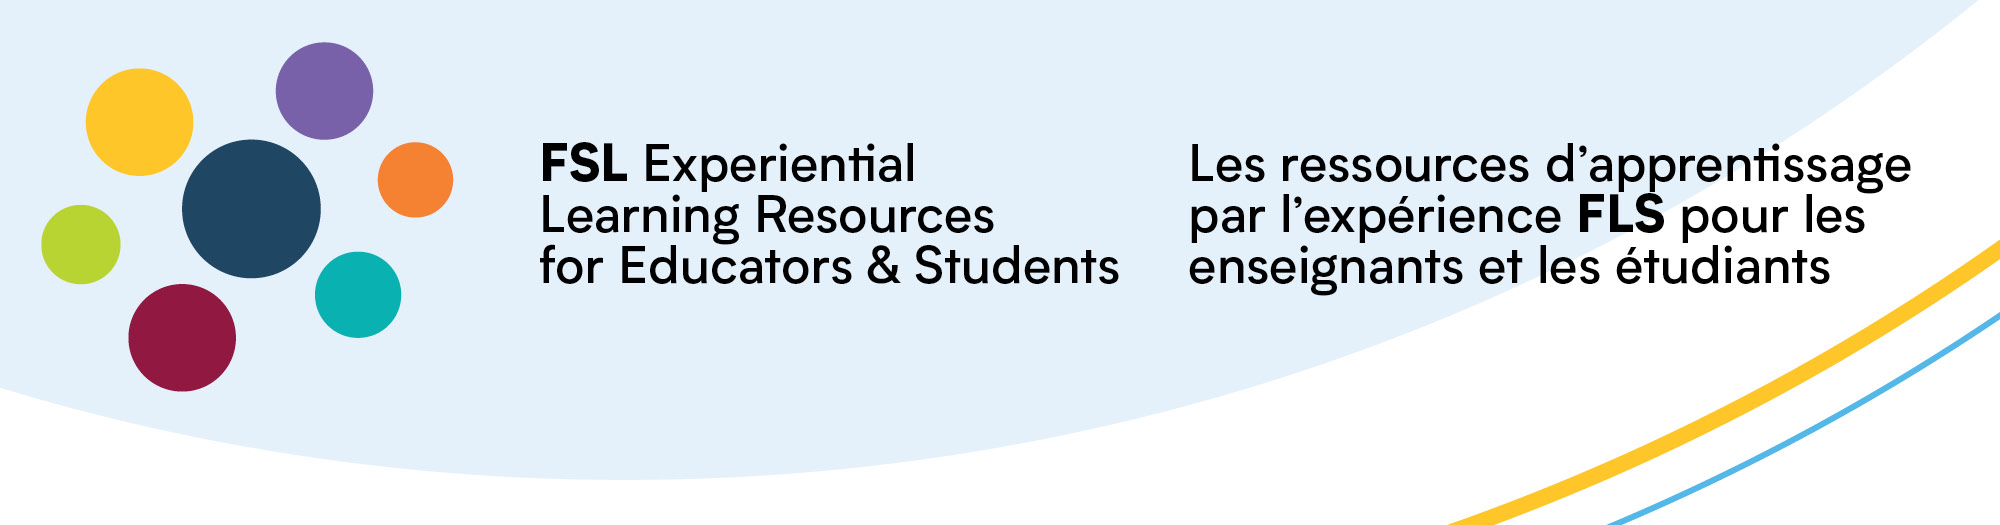 FSL Experiential Learning Resources for Educators & Students